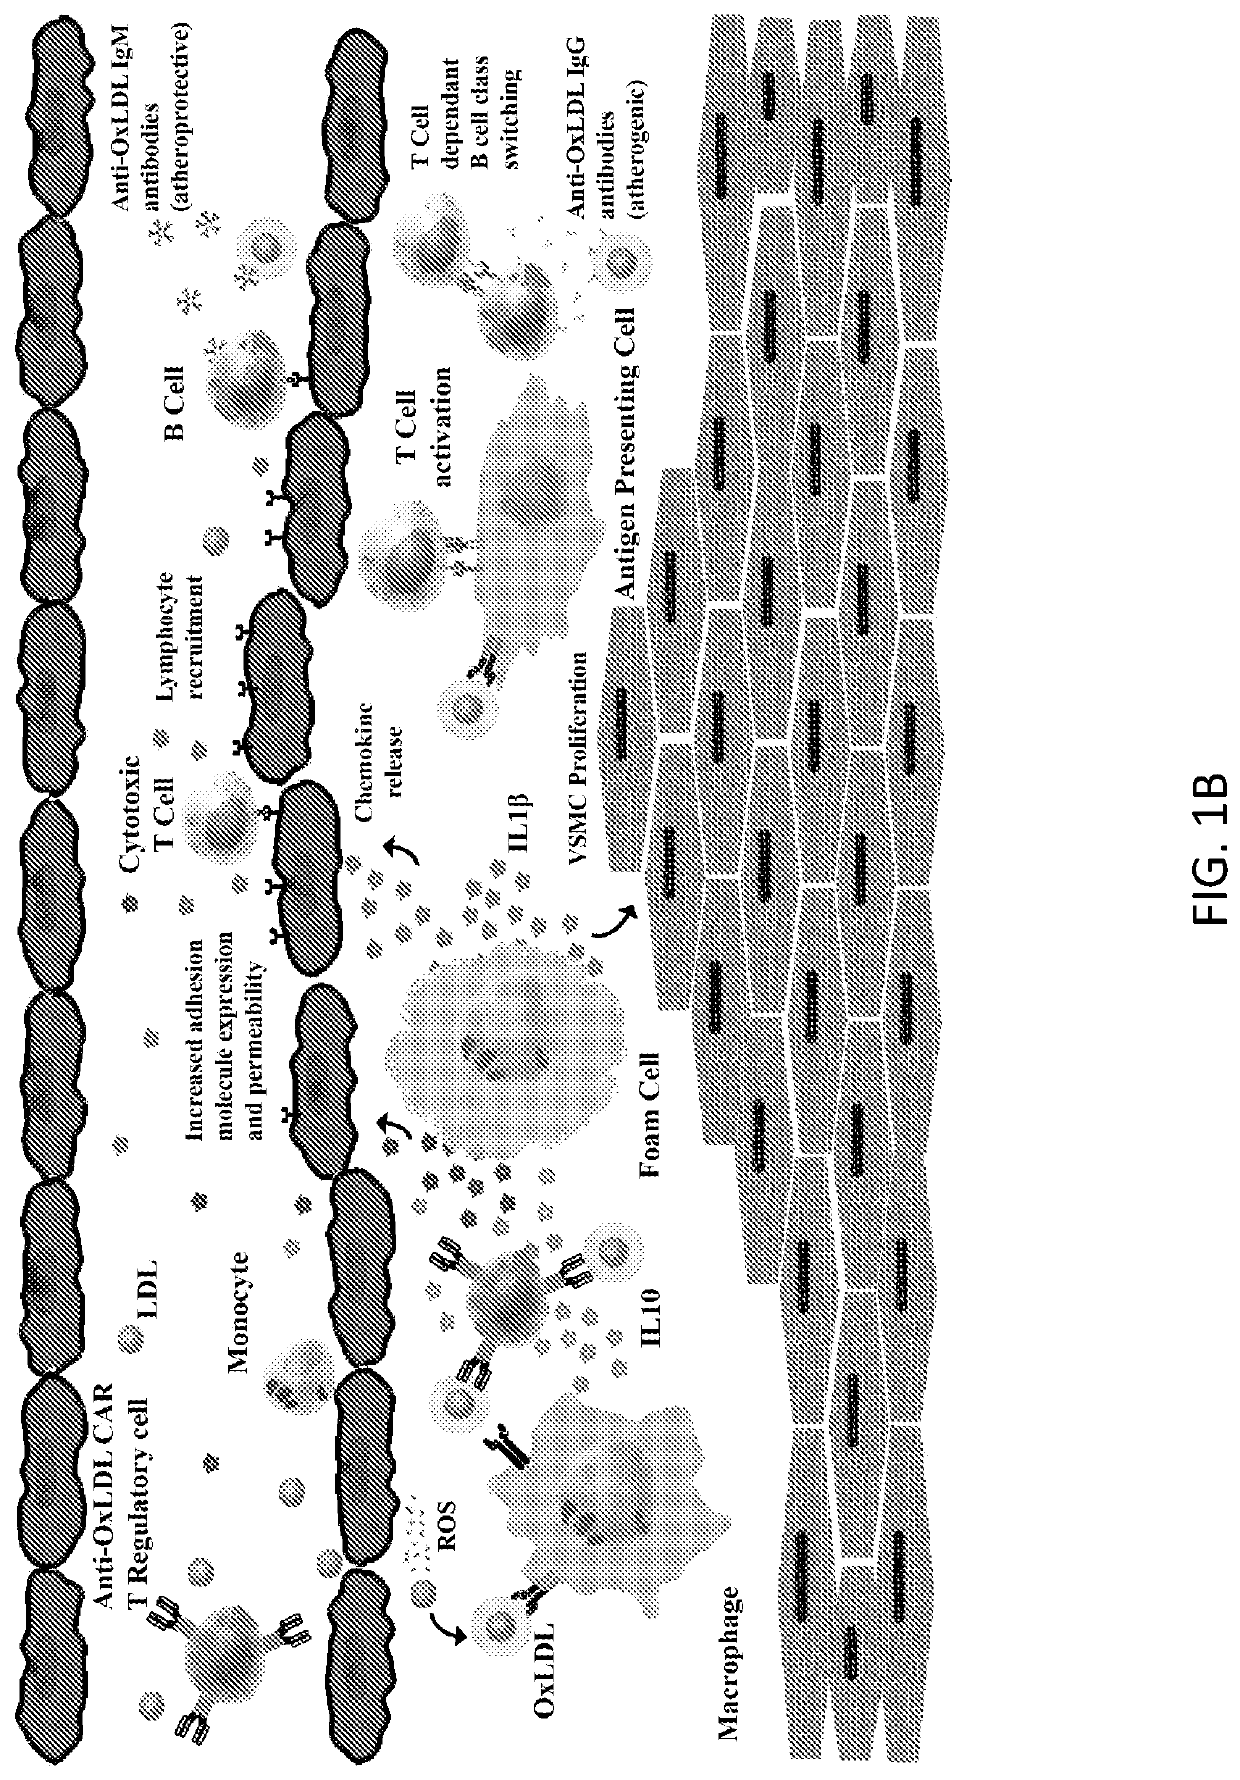 Chimeric Antigen Receptor T Regulatory Cells for the Treatment of Atherosclerosis